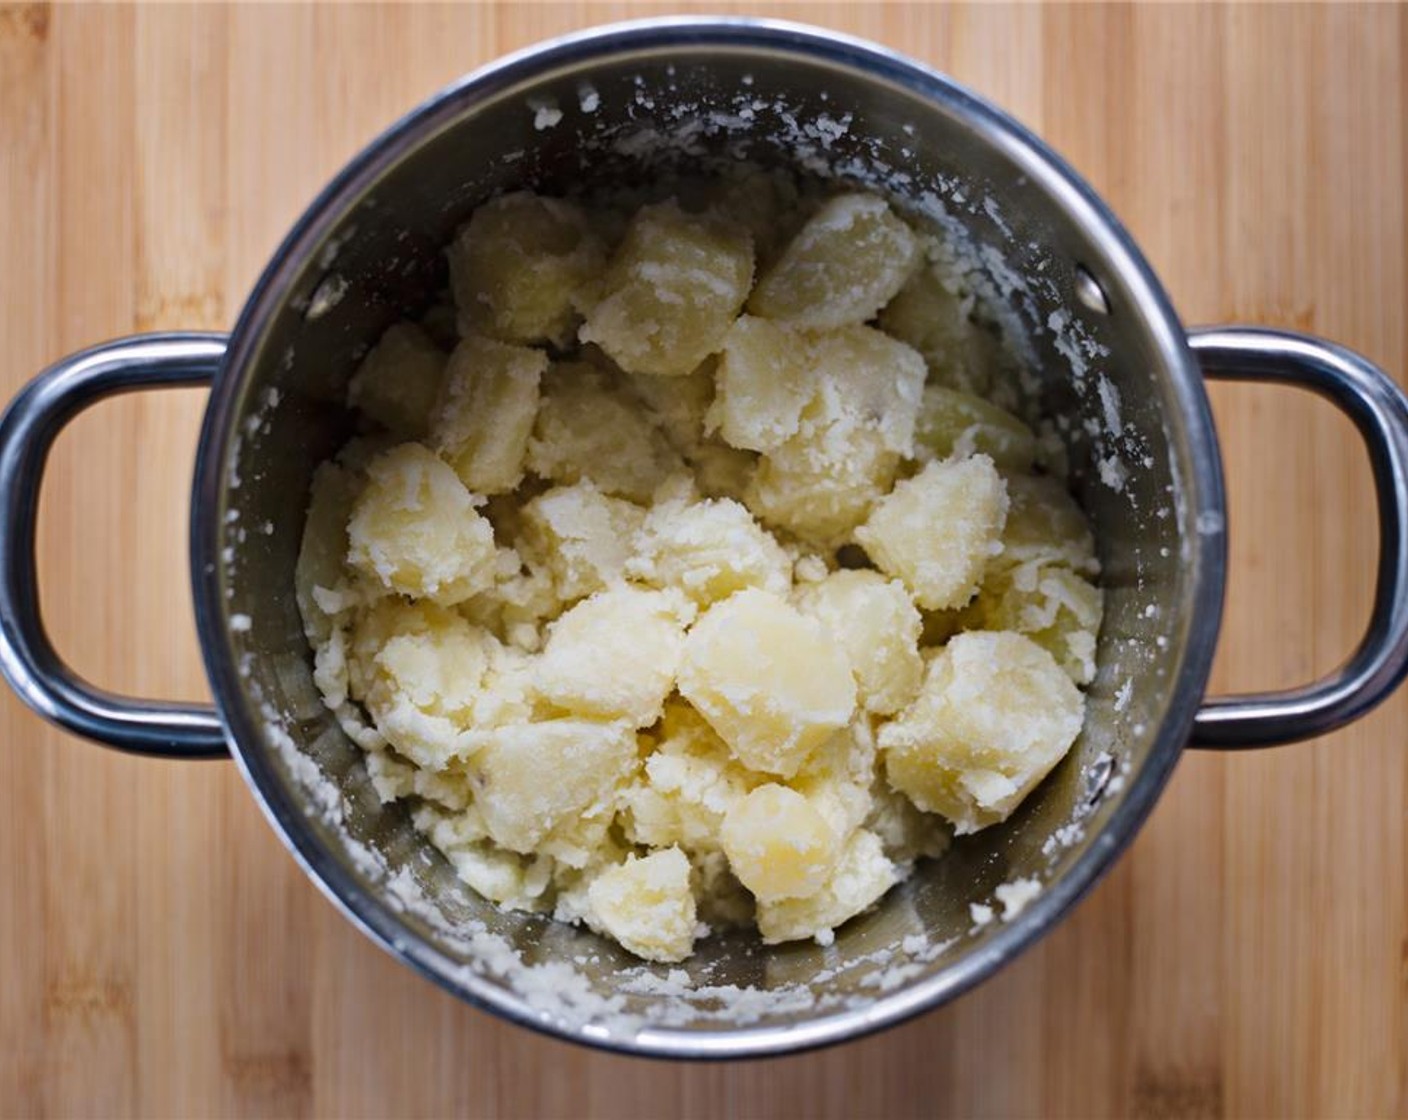 step 8 Vigorously shake the potatoes in the lidded pot to roughen the edges.